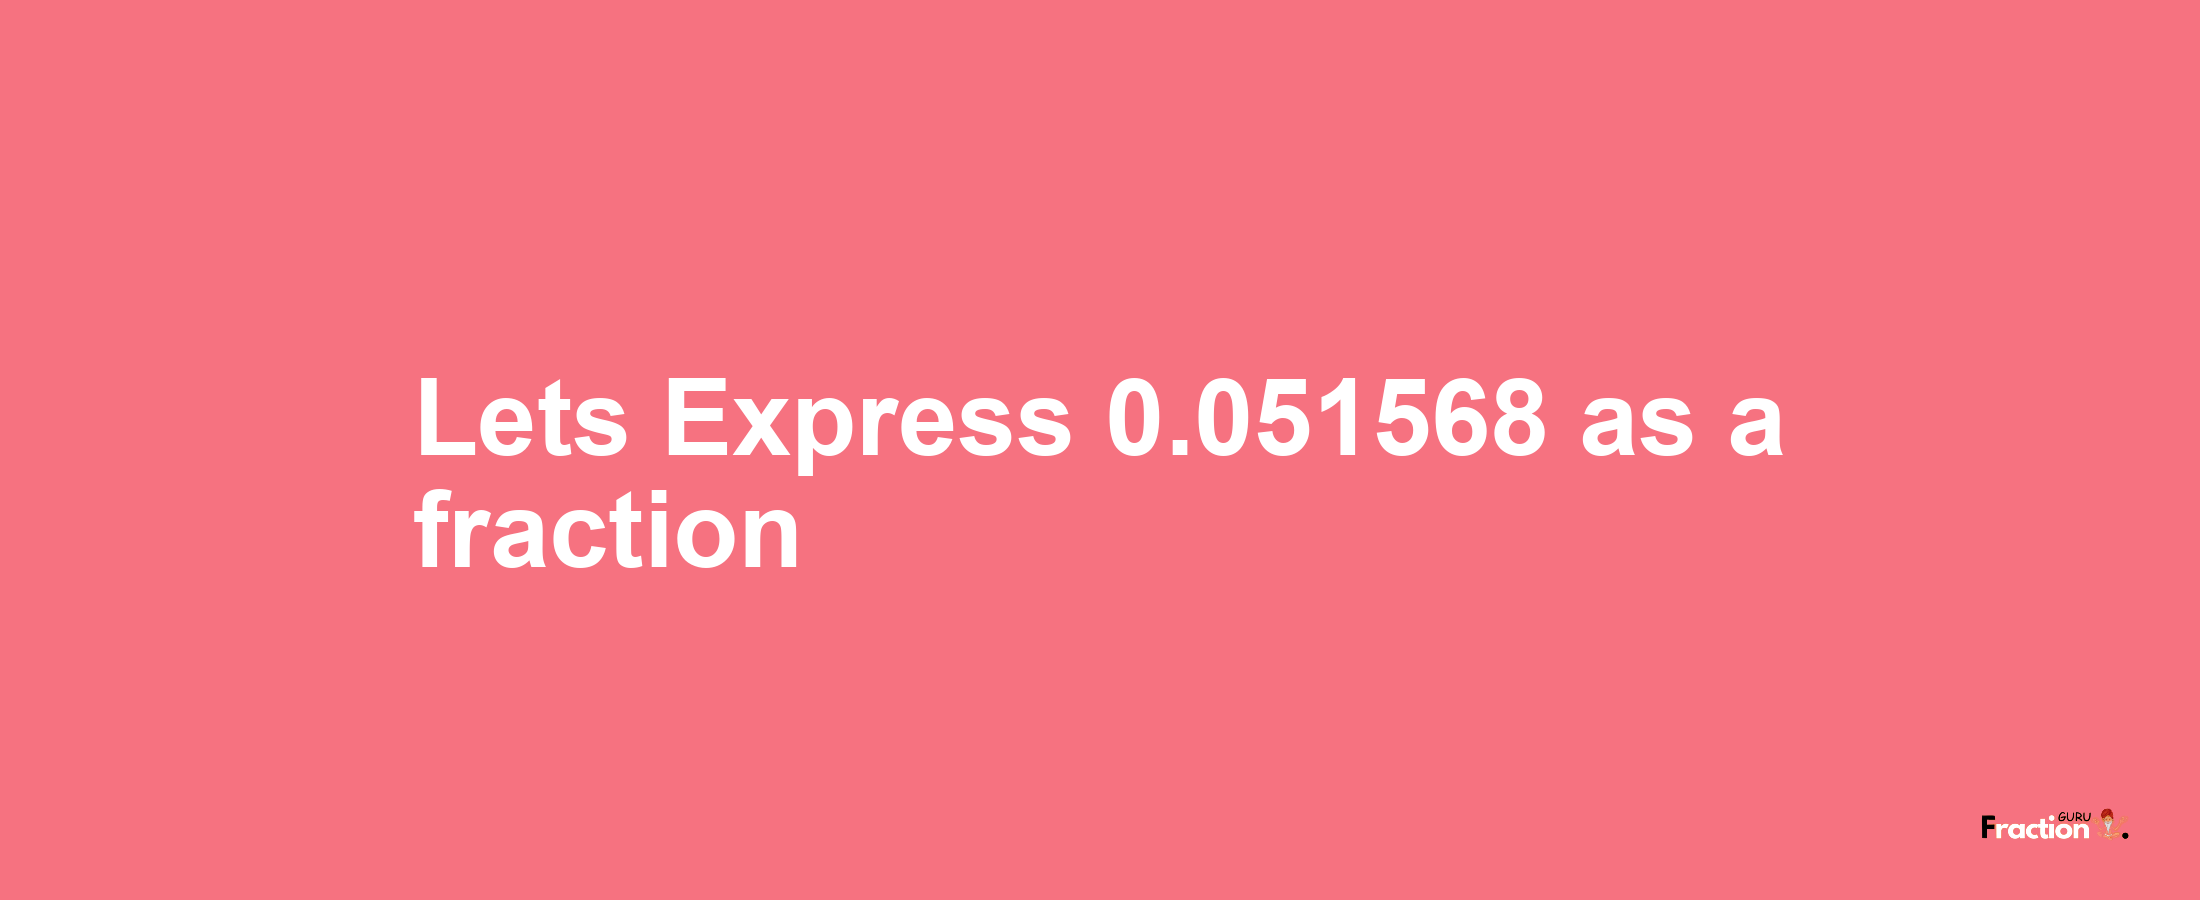 Lets Express 0.051568 as afraction